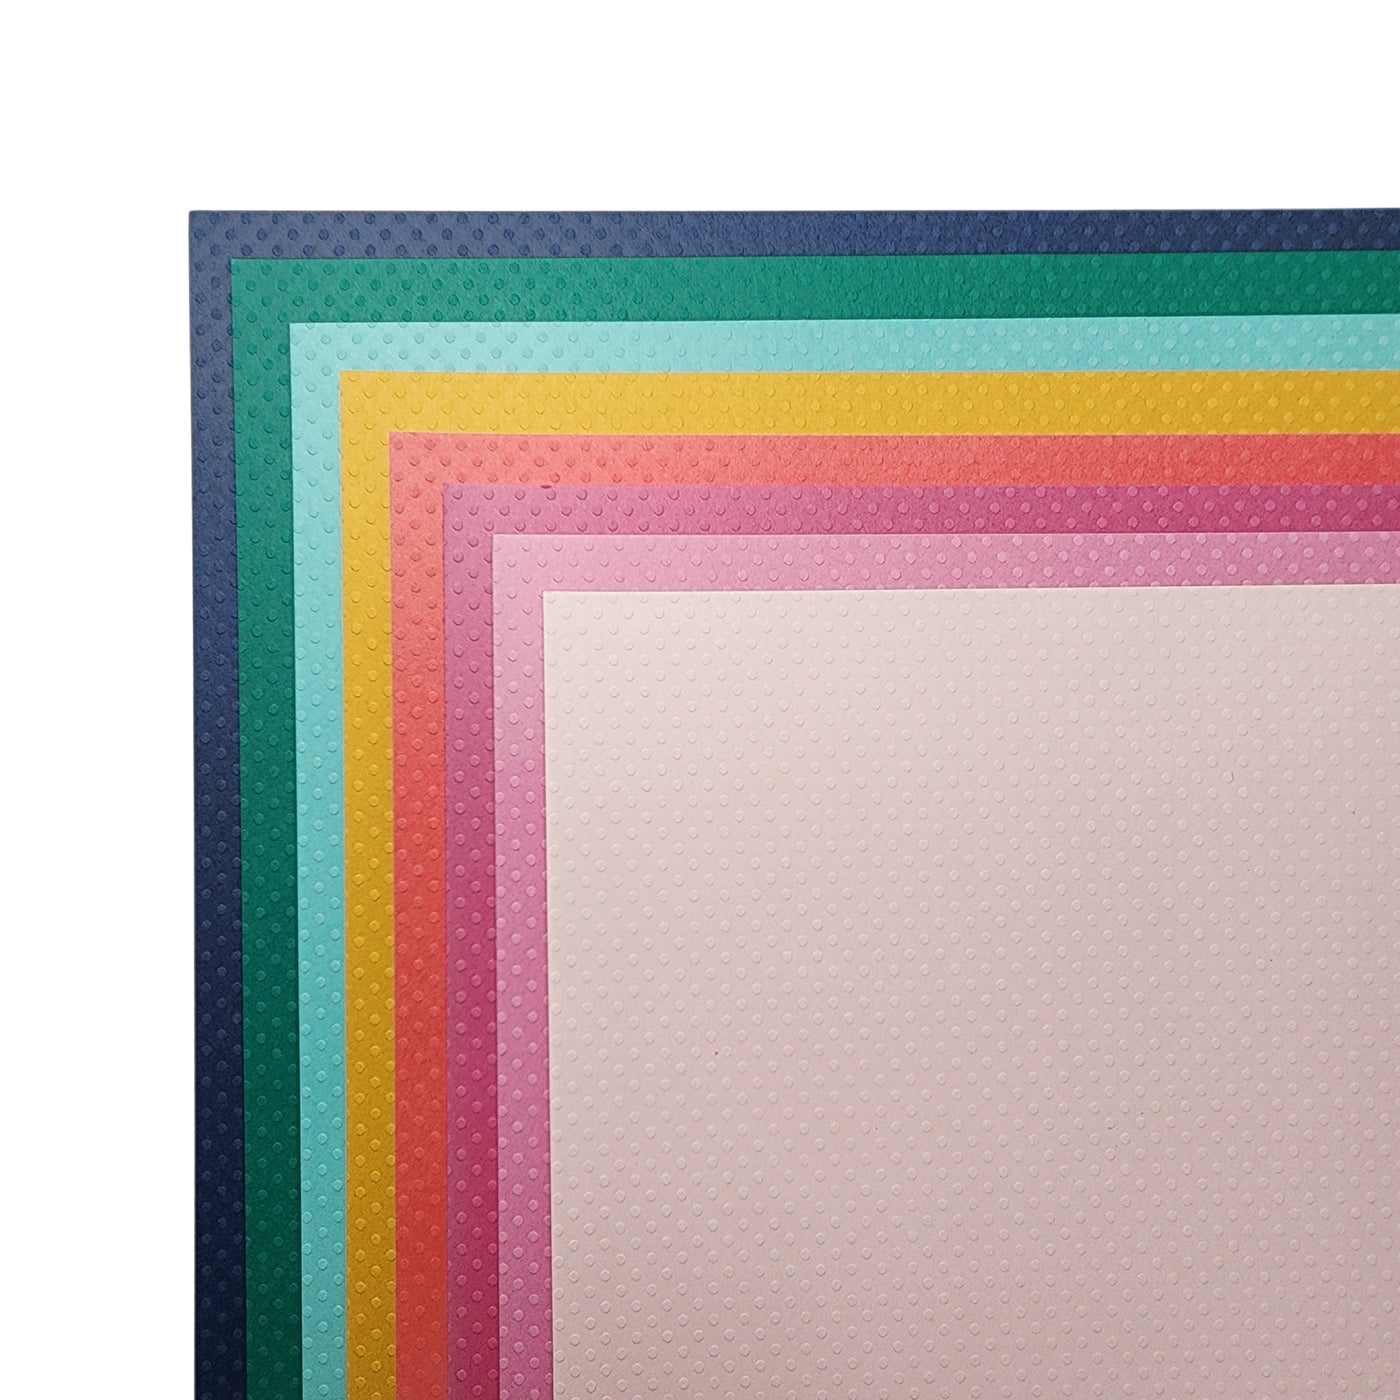 The assortment pack includes two each of eight bright, candy-colored shoppe shades of the Bazzill Dotted Swiss embossed dot collection. 12x12 cardstock is archival-safe.